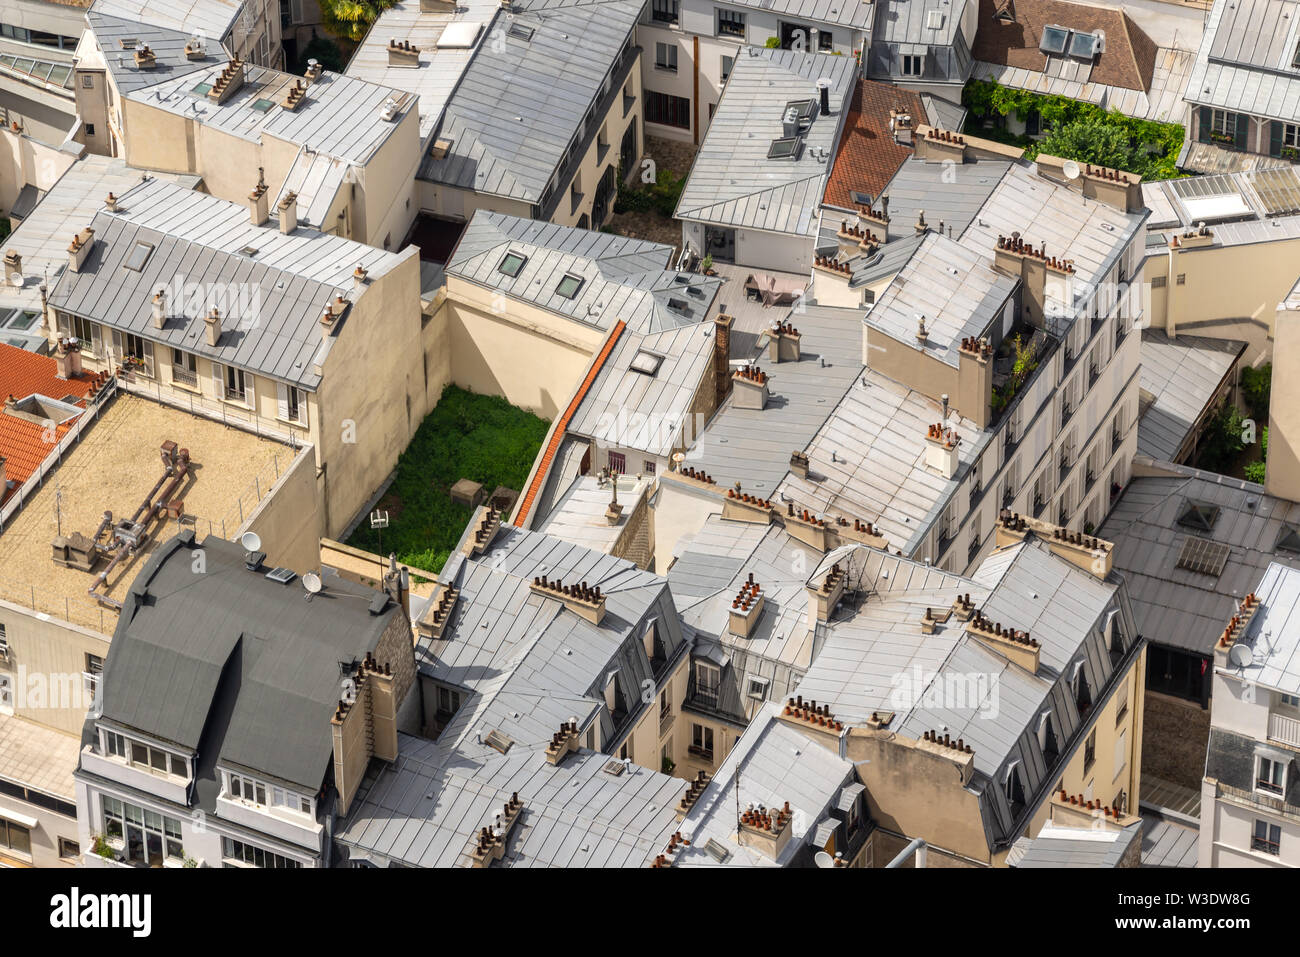 Aerial view of buildings, traditional zinc roofs and chimneys in Paris, France Stock Photo